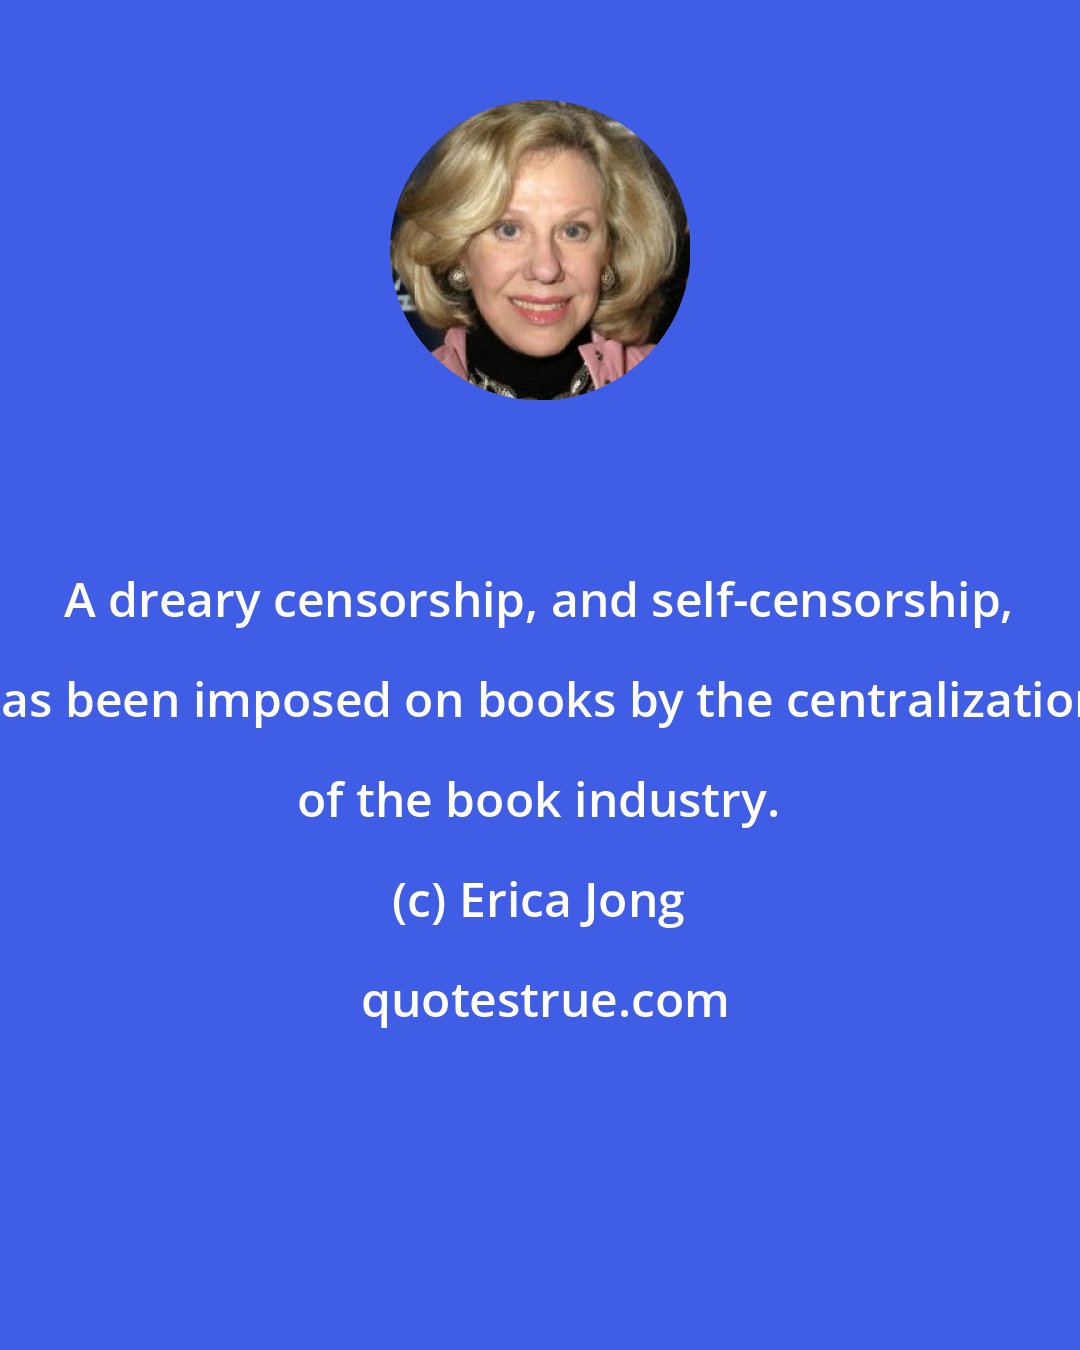 Erica Jong: A dreary censorship, and self-censorship, has been imposed on books by the centralization of the book industry.